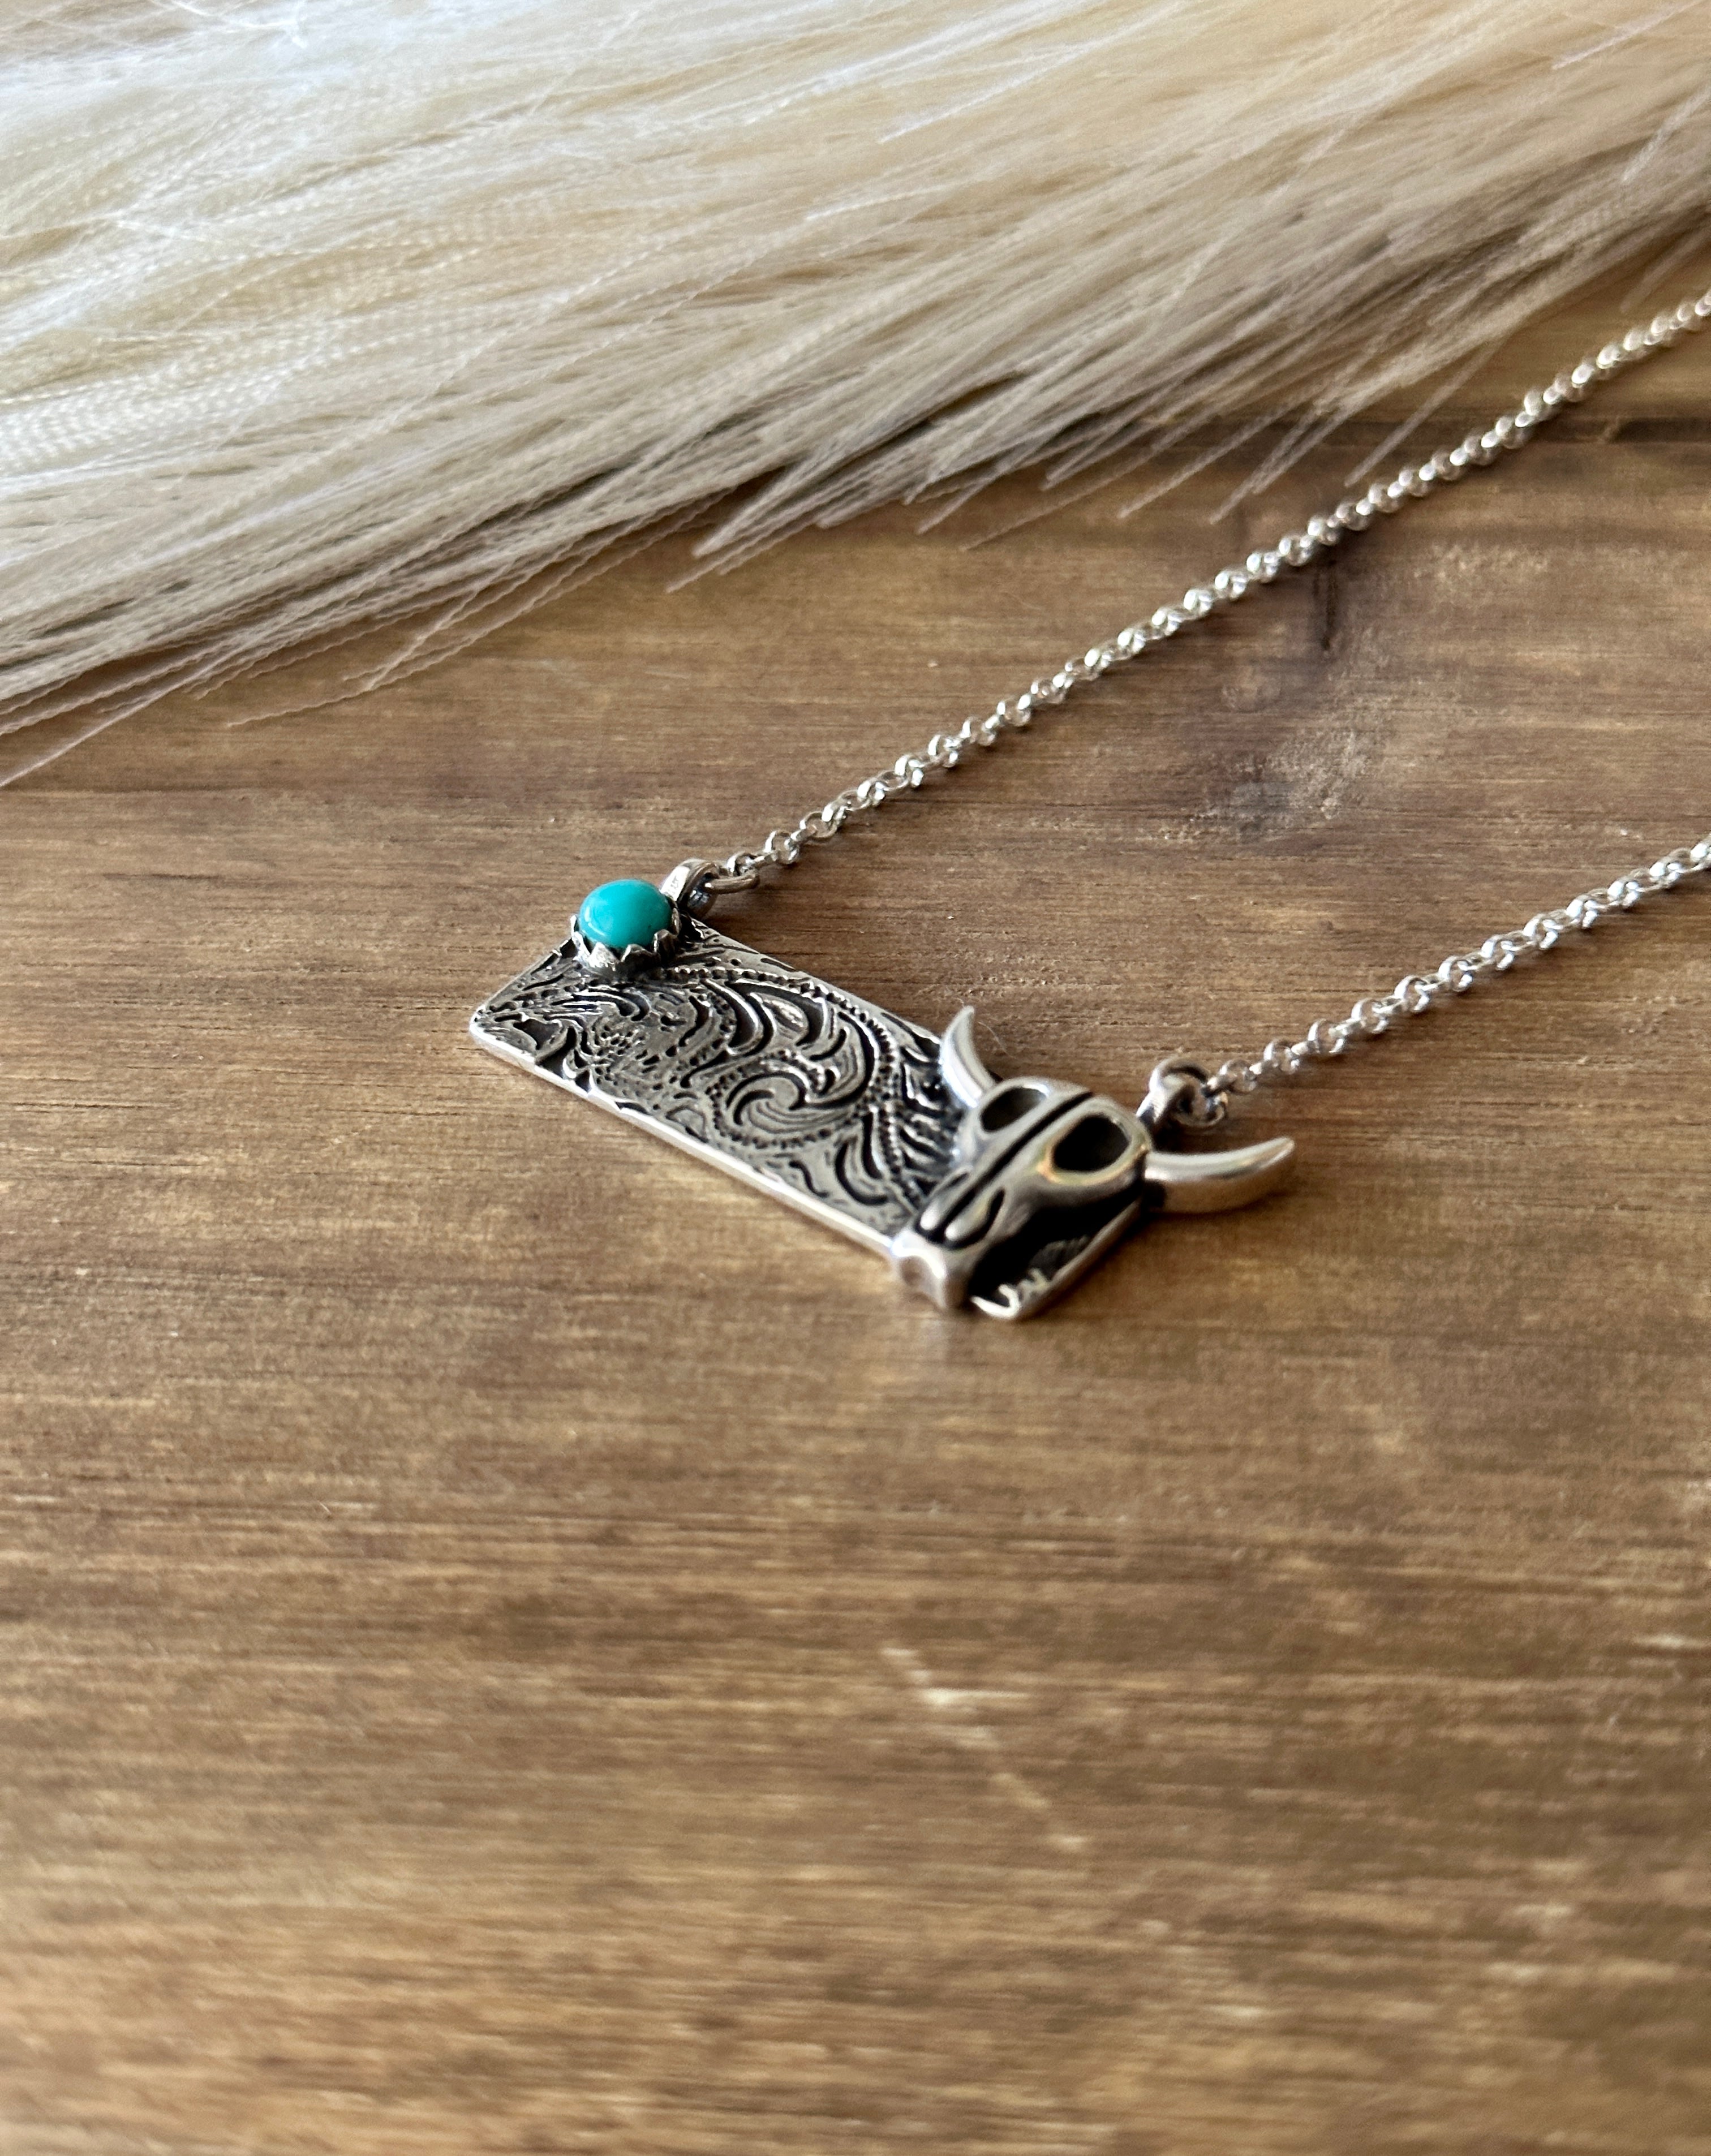 Southwest Handmade Turquoise & Sterling Silver Steer Bar Necklace